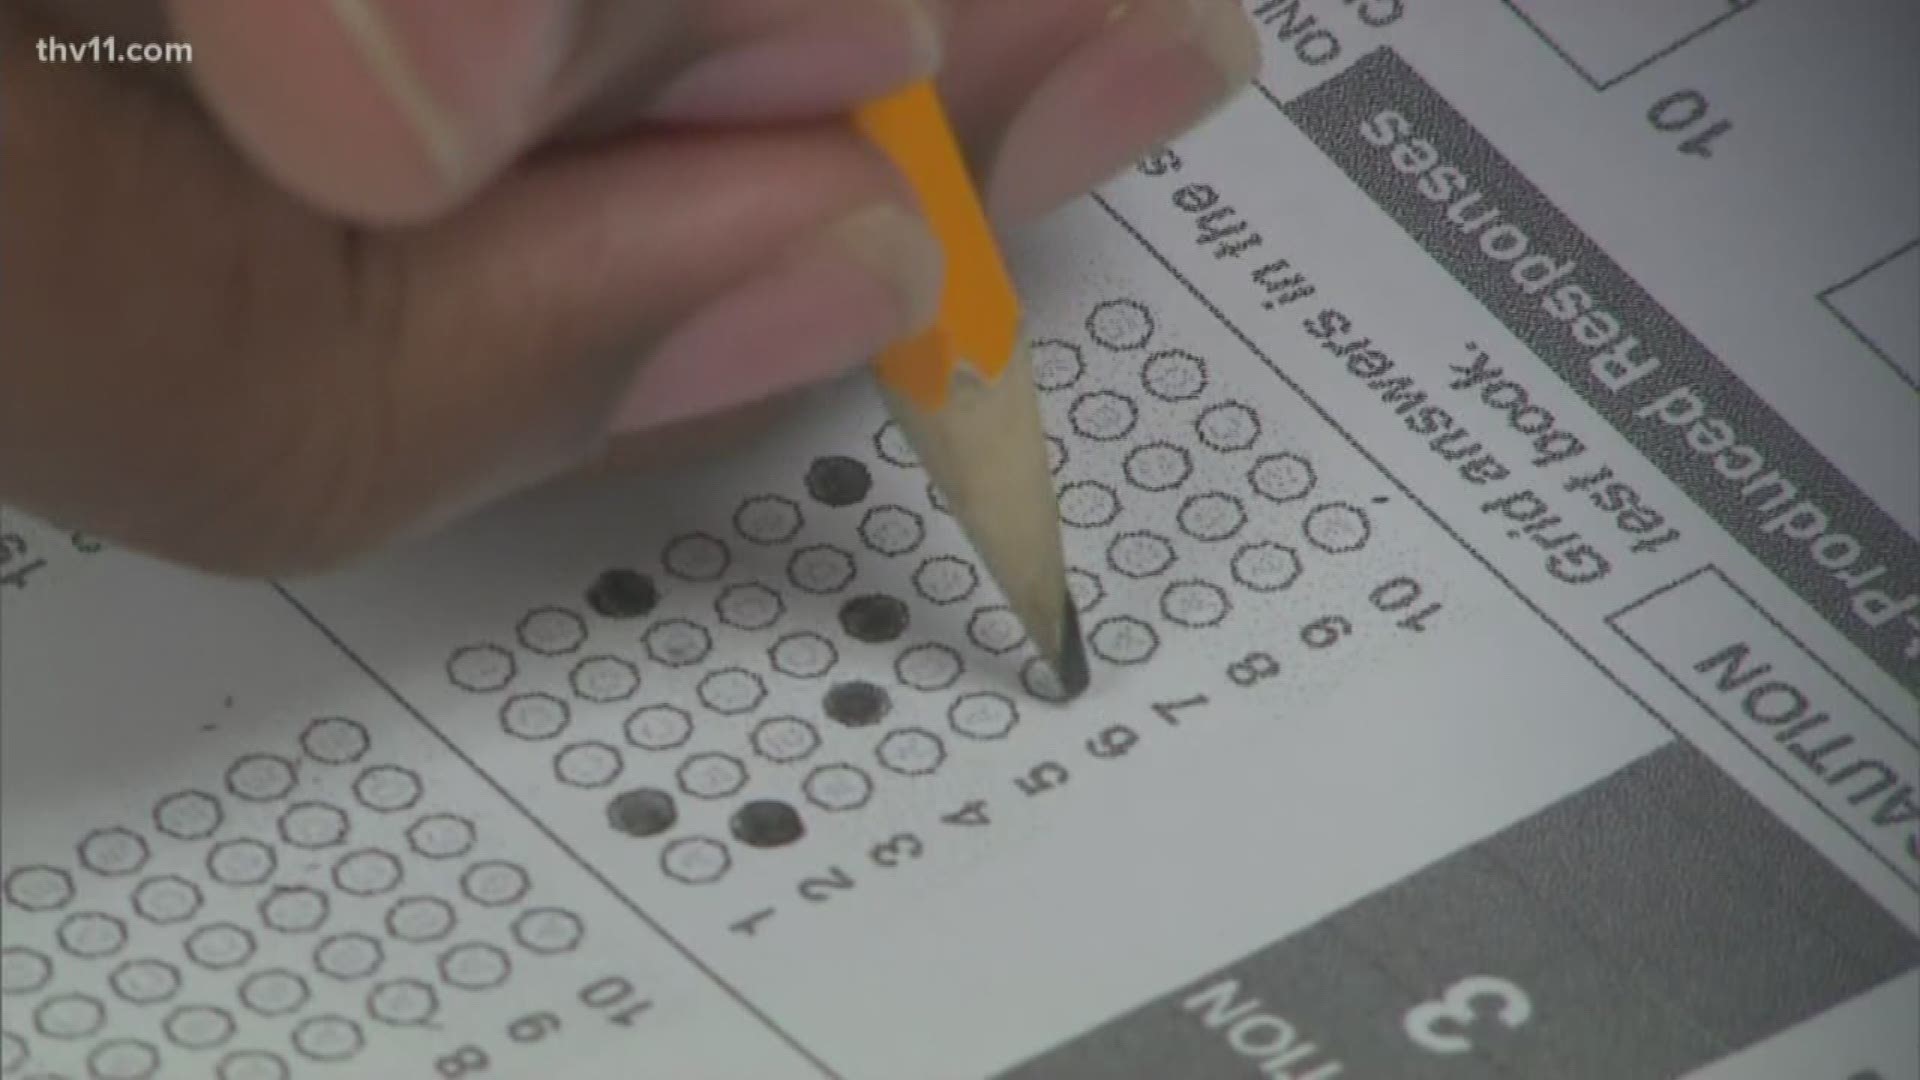 There's testing going on right now and still more than a month left in school, but districts across the state are getting progress reports today.